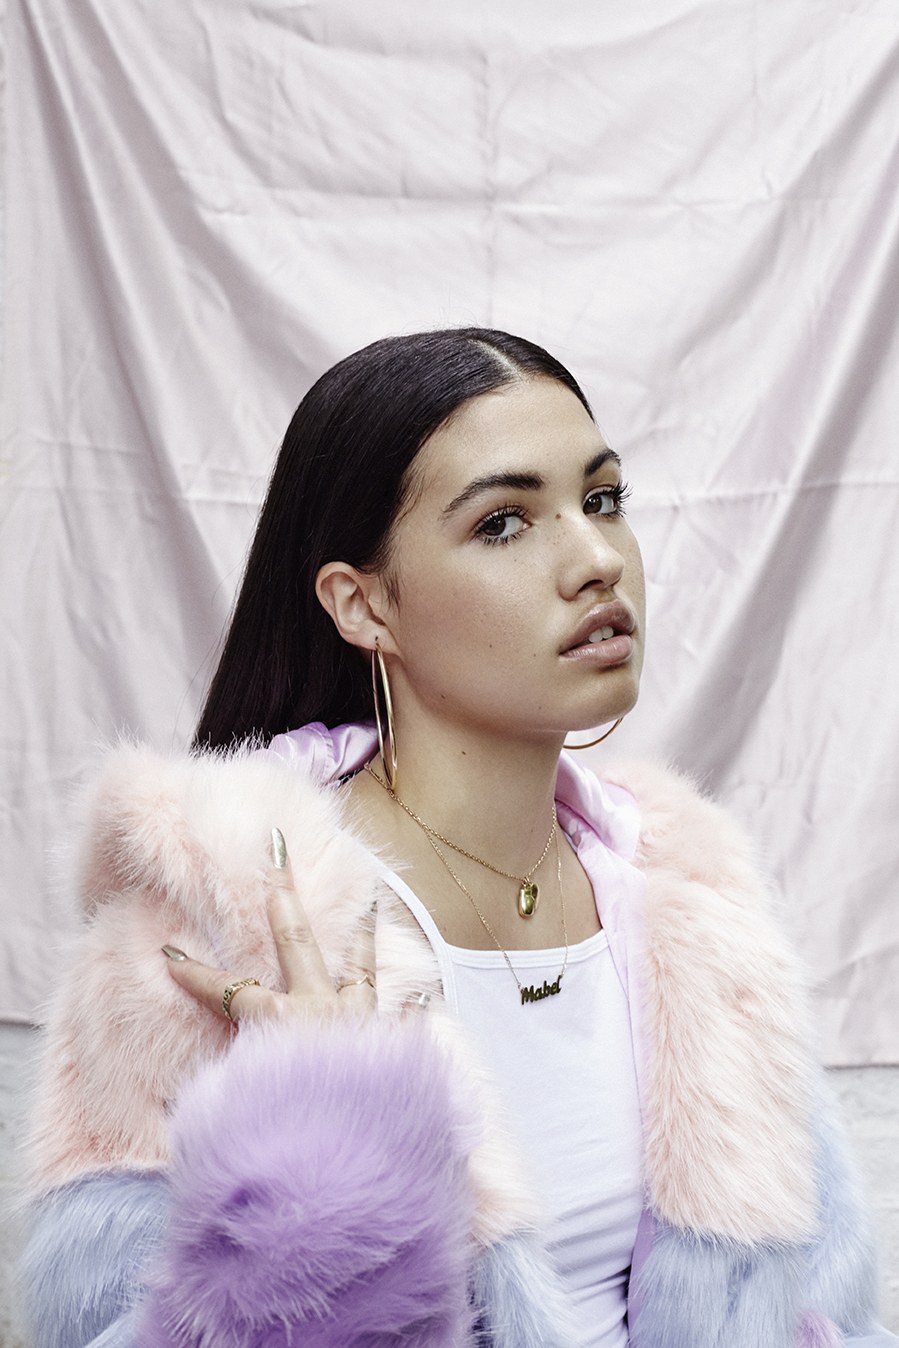 Mabel is ushering in a new age of independent women in R&B